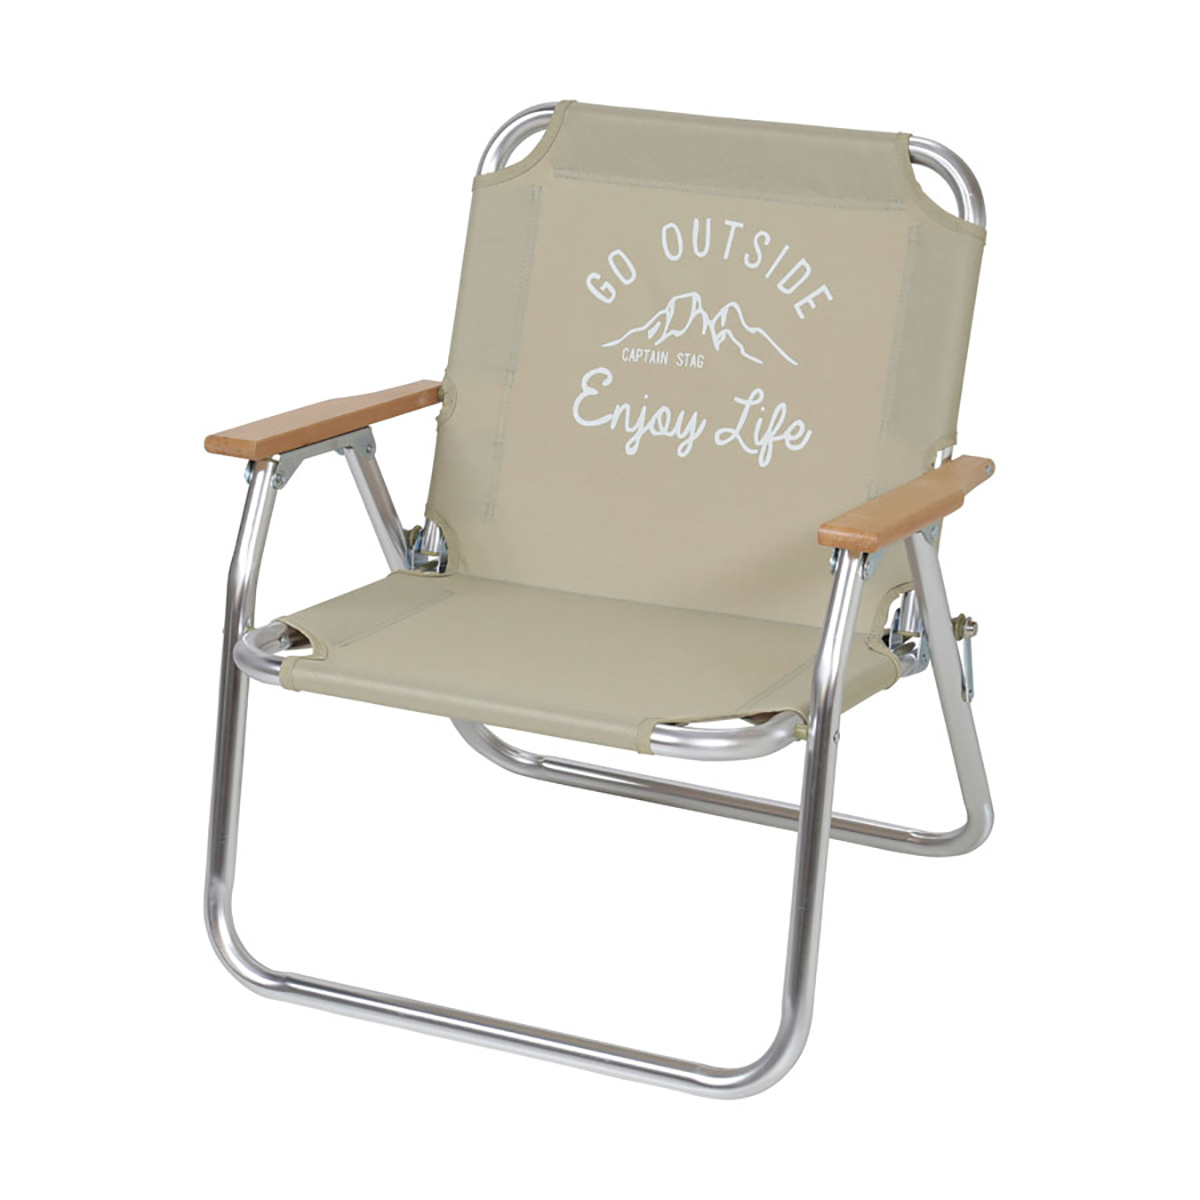 CAPTAIN STAG MONTE LOW STYLE LOW CHAIR